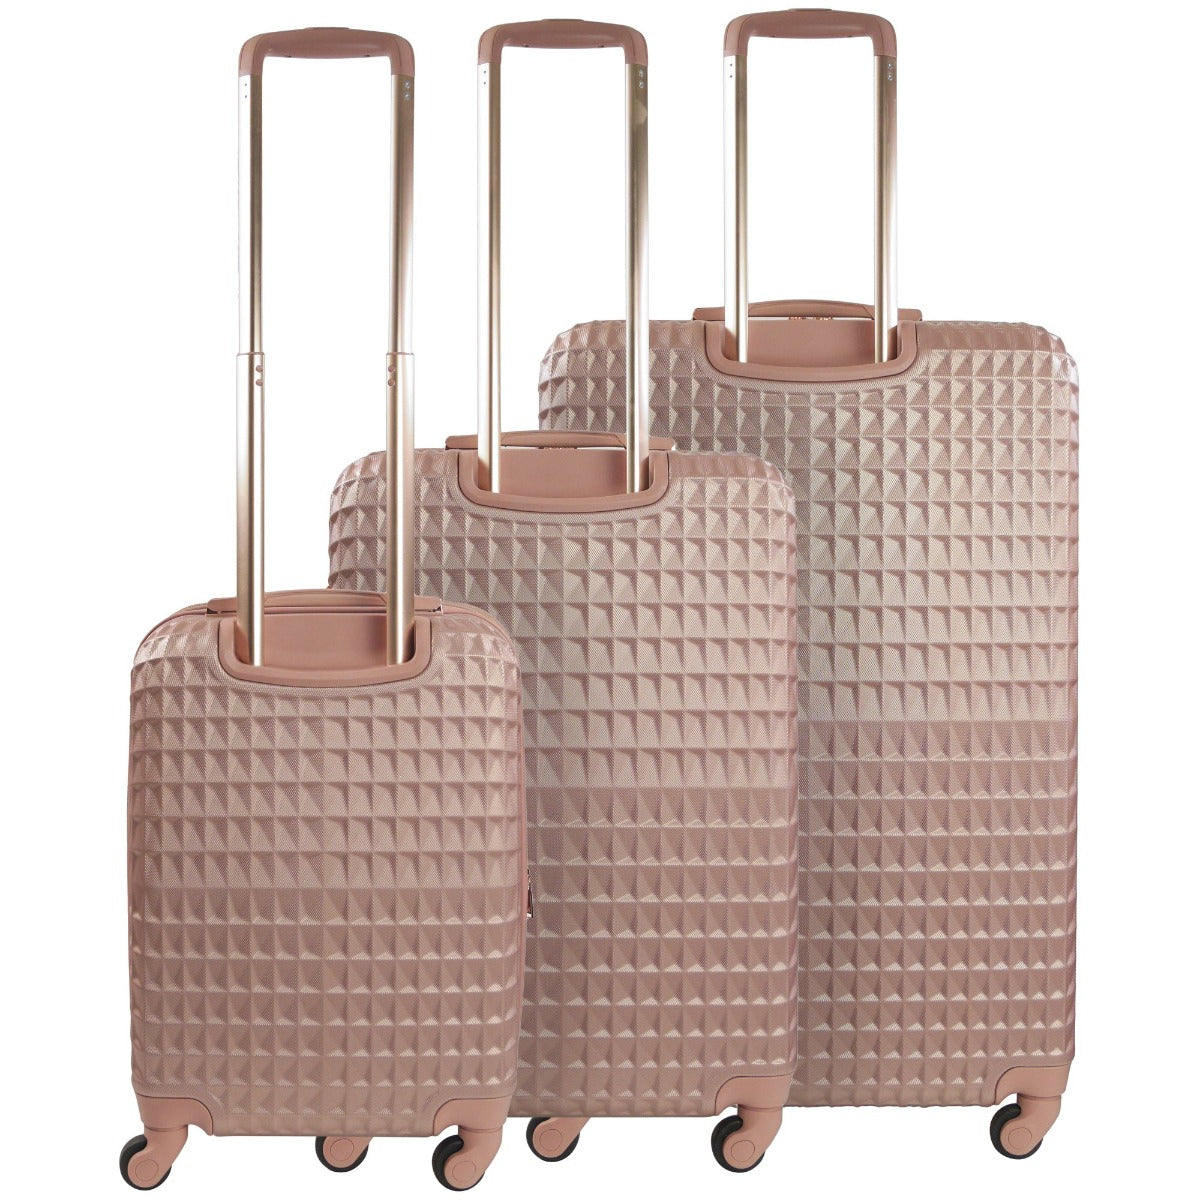 Ful Geo hard sided spinner suitcase 3 piece luggage set rose gold